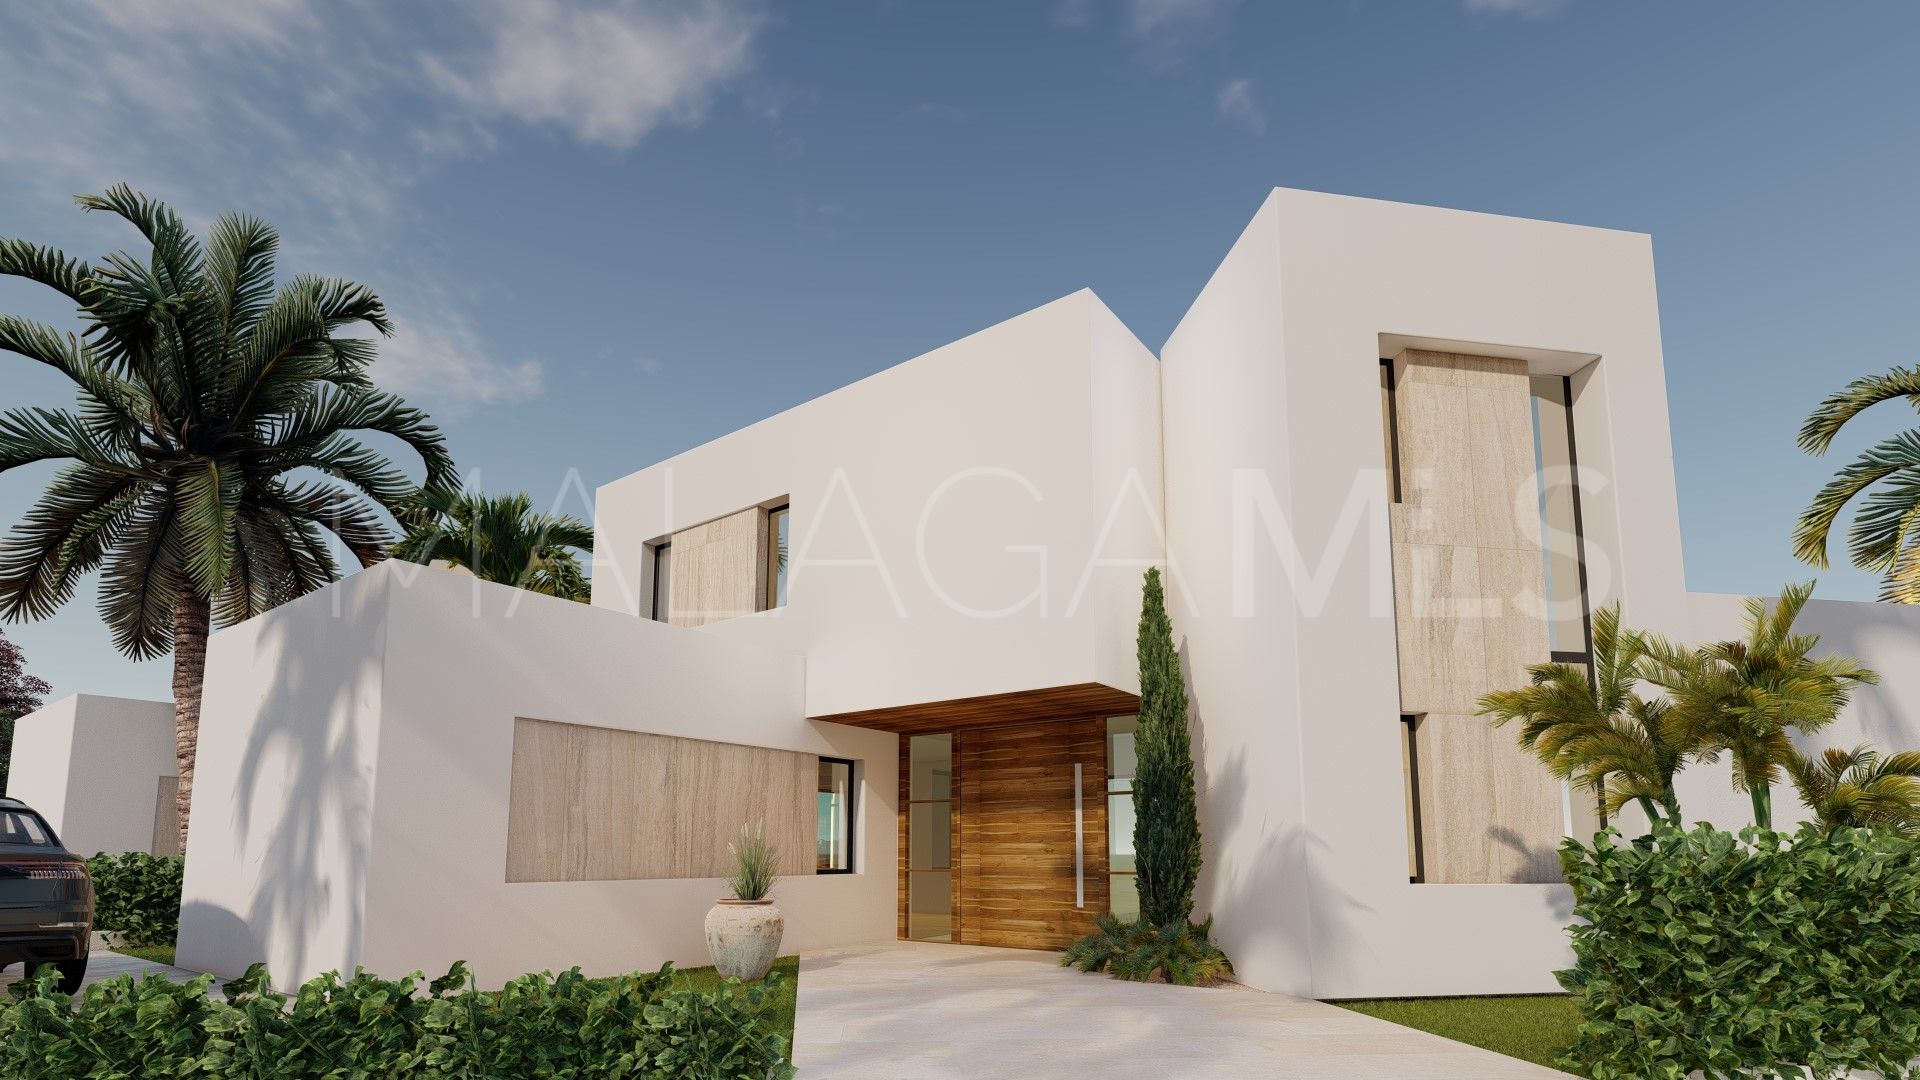 Azata Golf, villa for sale with 3 bedrooms